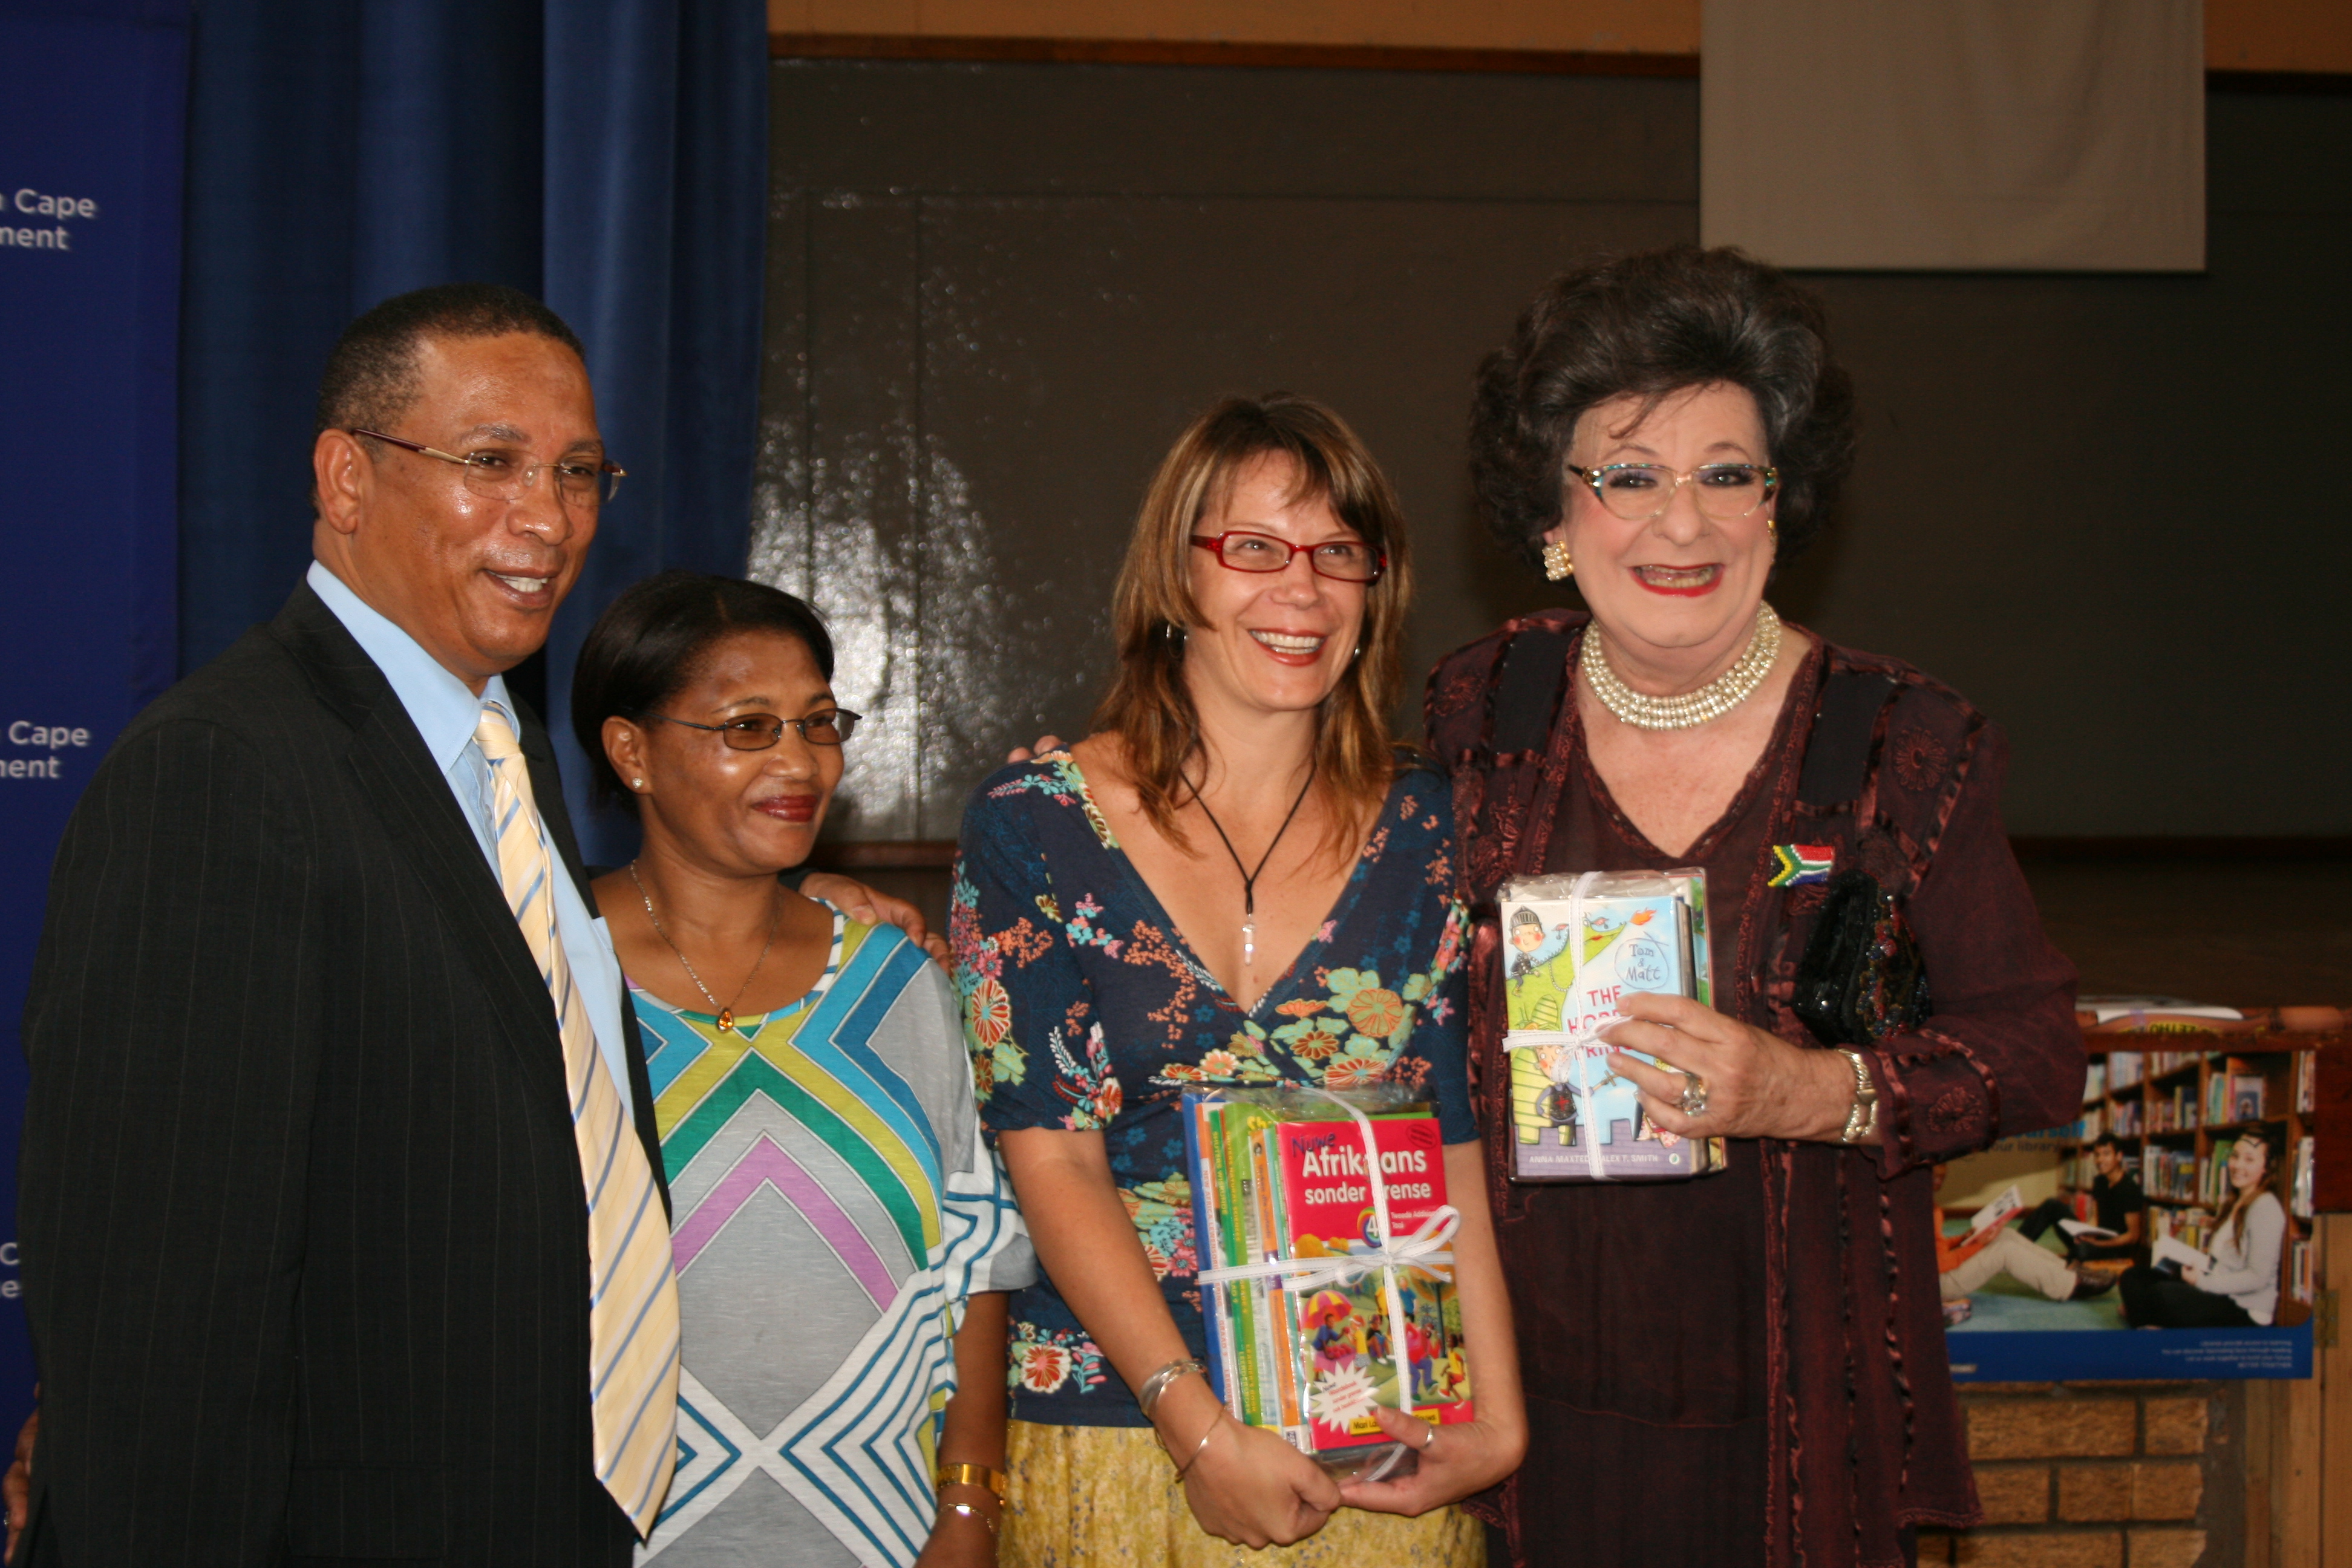 Minister Ivan Meyer handing over books to Evita Bezuidenhout and representatives of the Darling trust.